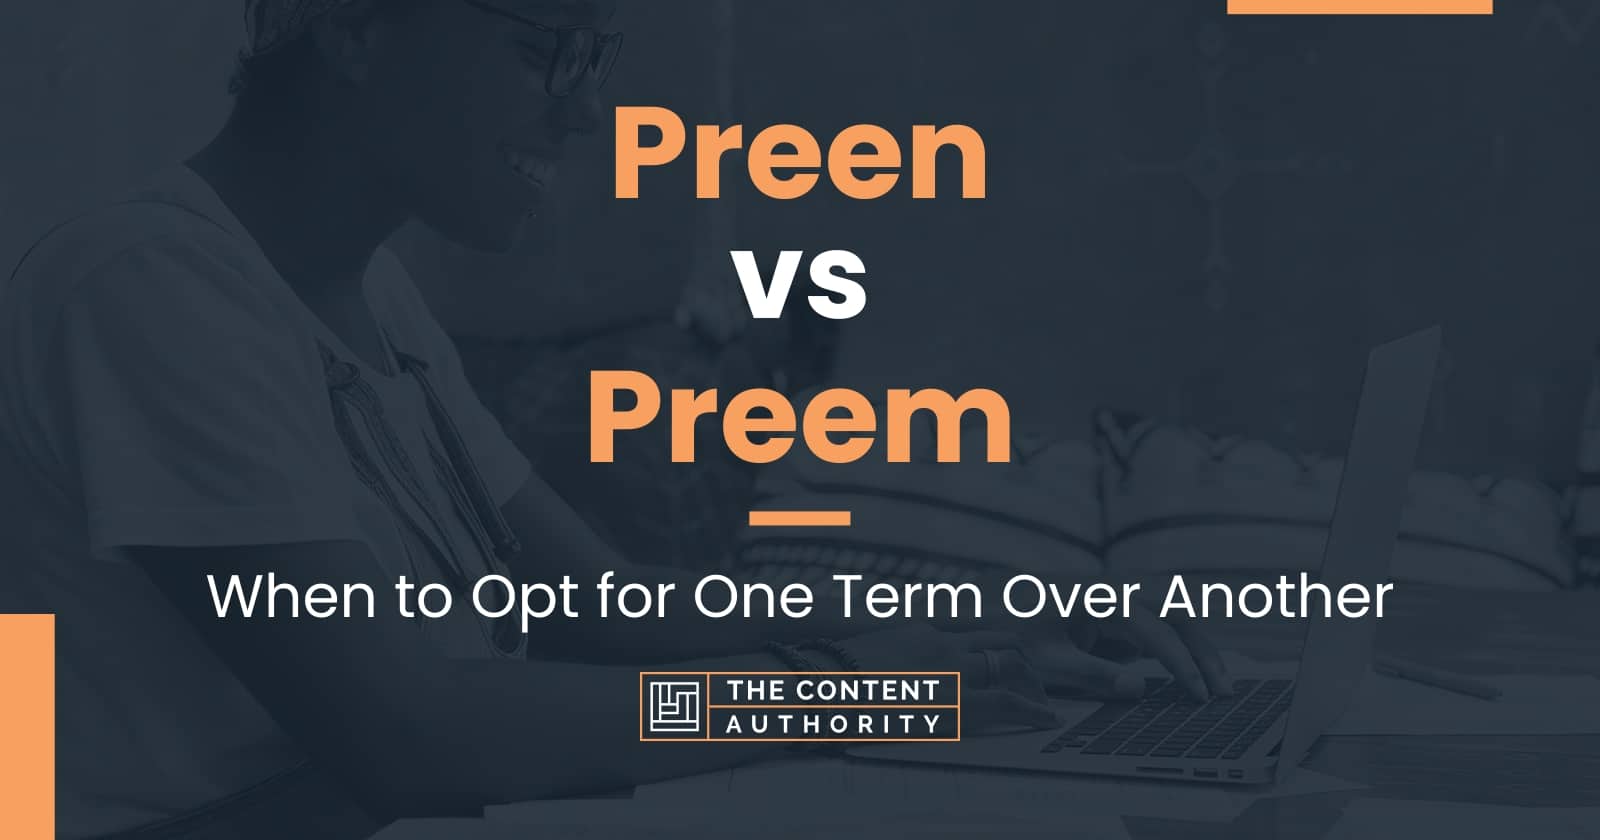 Preen vs Preem: When to Opt for One Term Over Another